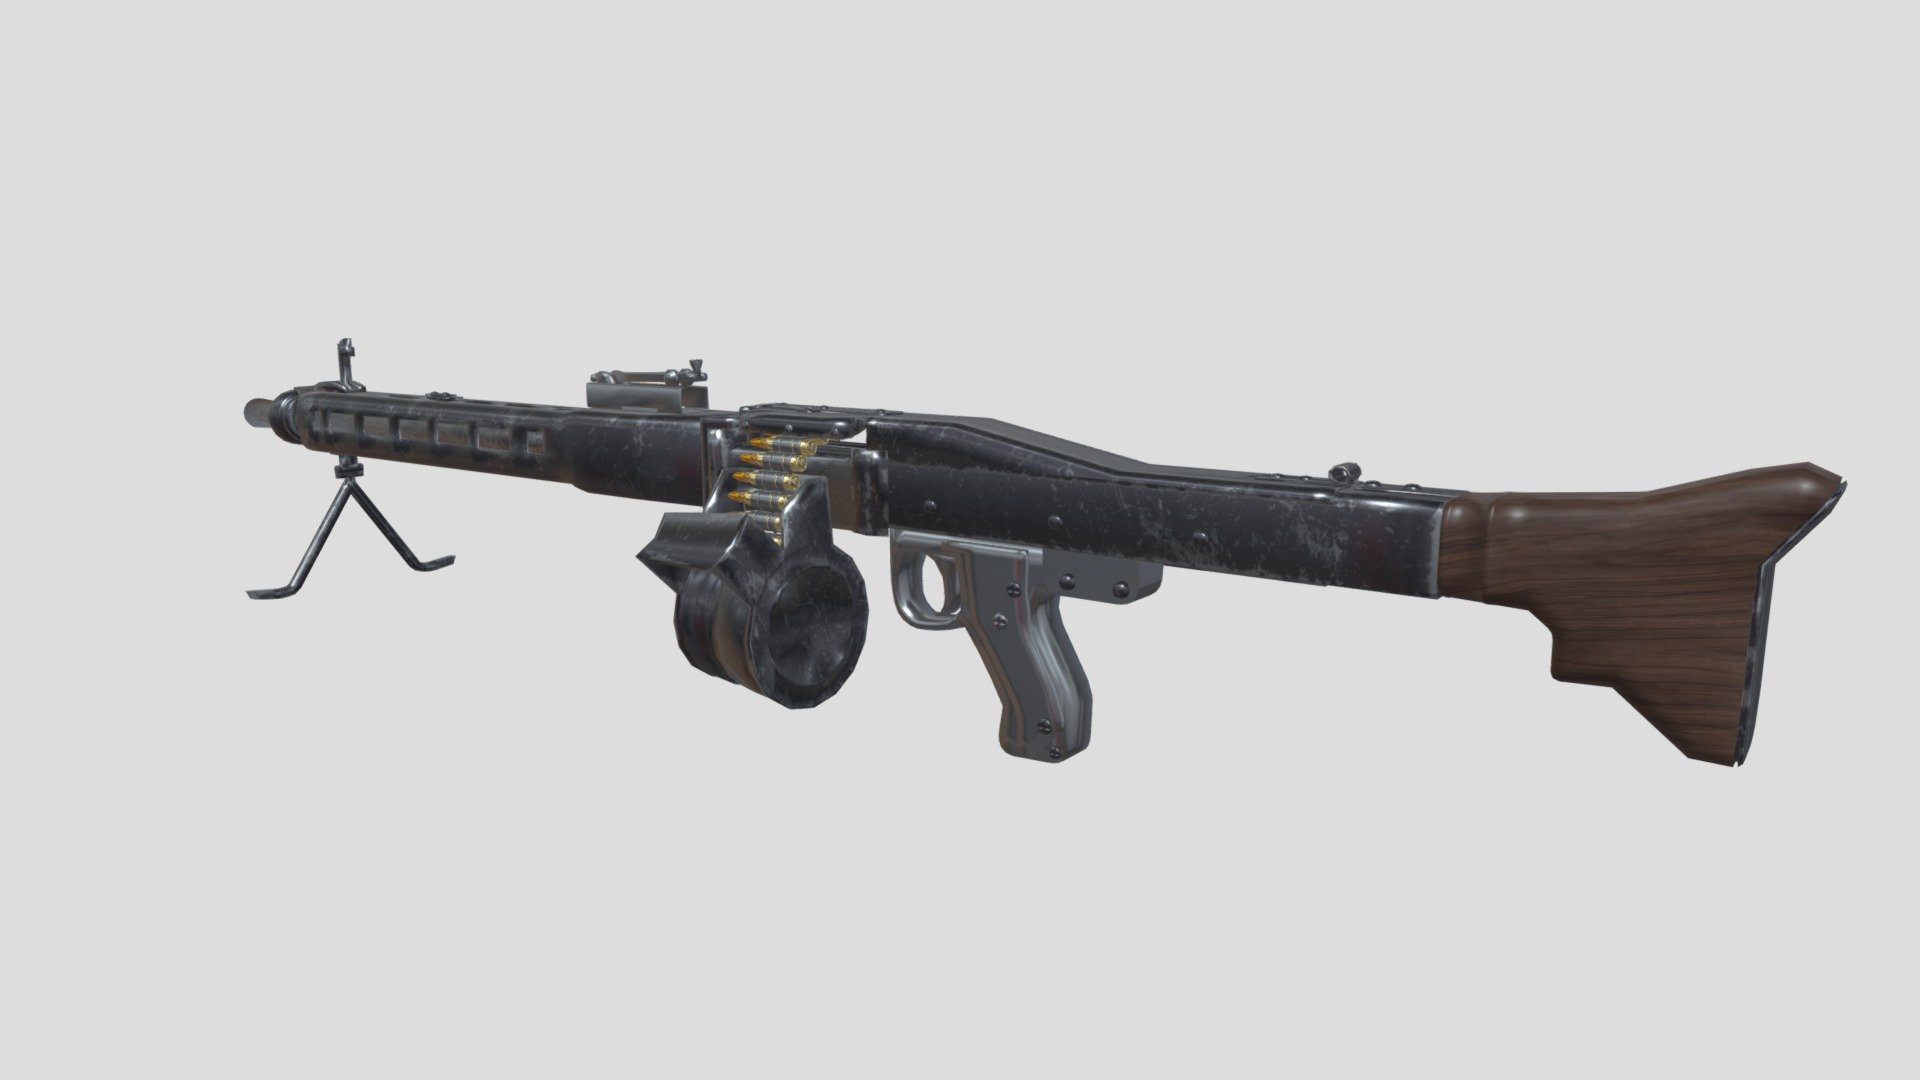 3d model of a Mg3 Machine Gun. Perfect for games, scenes or renders.

Model is correctly divided into main parts. All main parts are presented as separate parts therefore materials of objects are easy to be modified or removed and standard parts are easy to be replaced.

TEXTURES: Models includes high textures with maps: Base Color (.png) Height (.png) Metallic (.png) Normal (.png) Roughness (.png)

FORMATS: .obj .dae .stl .blend .fbx .3ds

GENERAL: Easy editable. Model is fully textured.

Vertices: 18.8k Polygons: 18.5k

All formats have been tested and work correctly.

Some files may need textures or materials adjusted or added depending on the program they are imported into 3d model